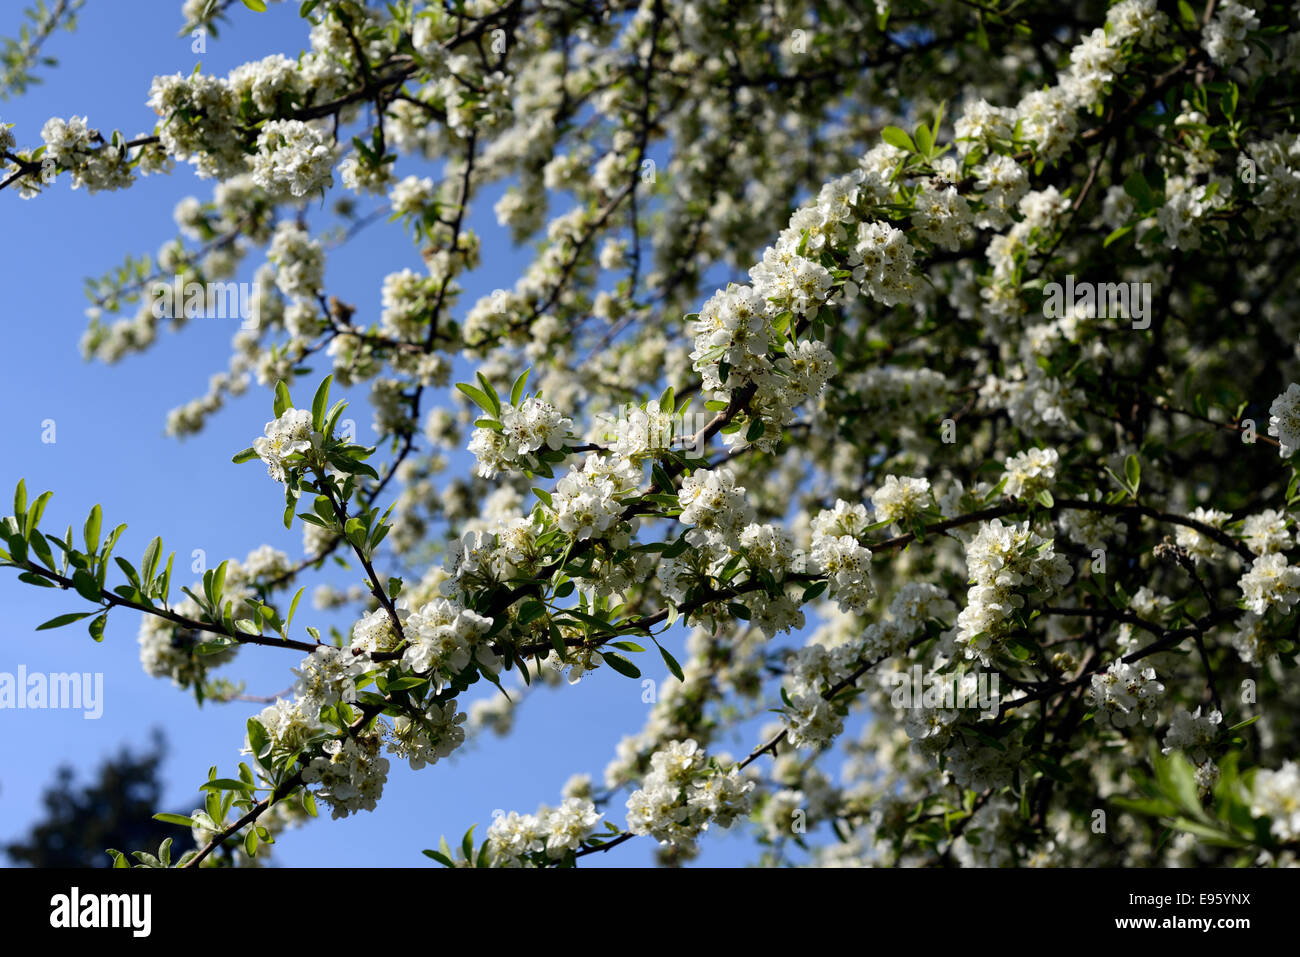 pyrus nivalis pears fruit trees white flowers blossoms plant portraits blossom deciduous spring Stock Photo